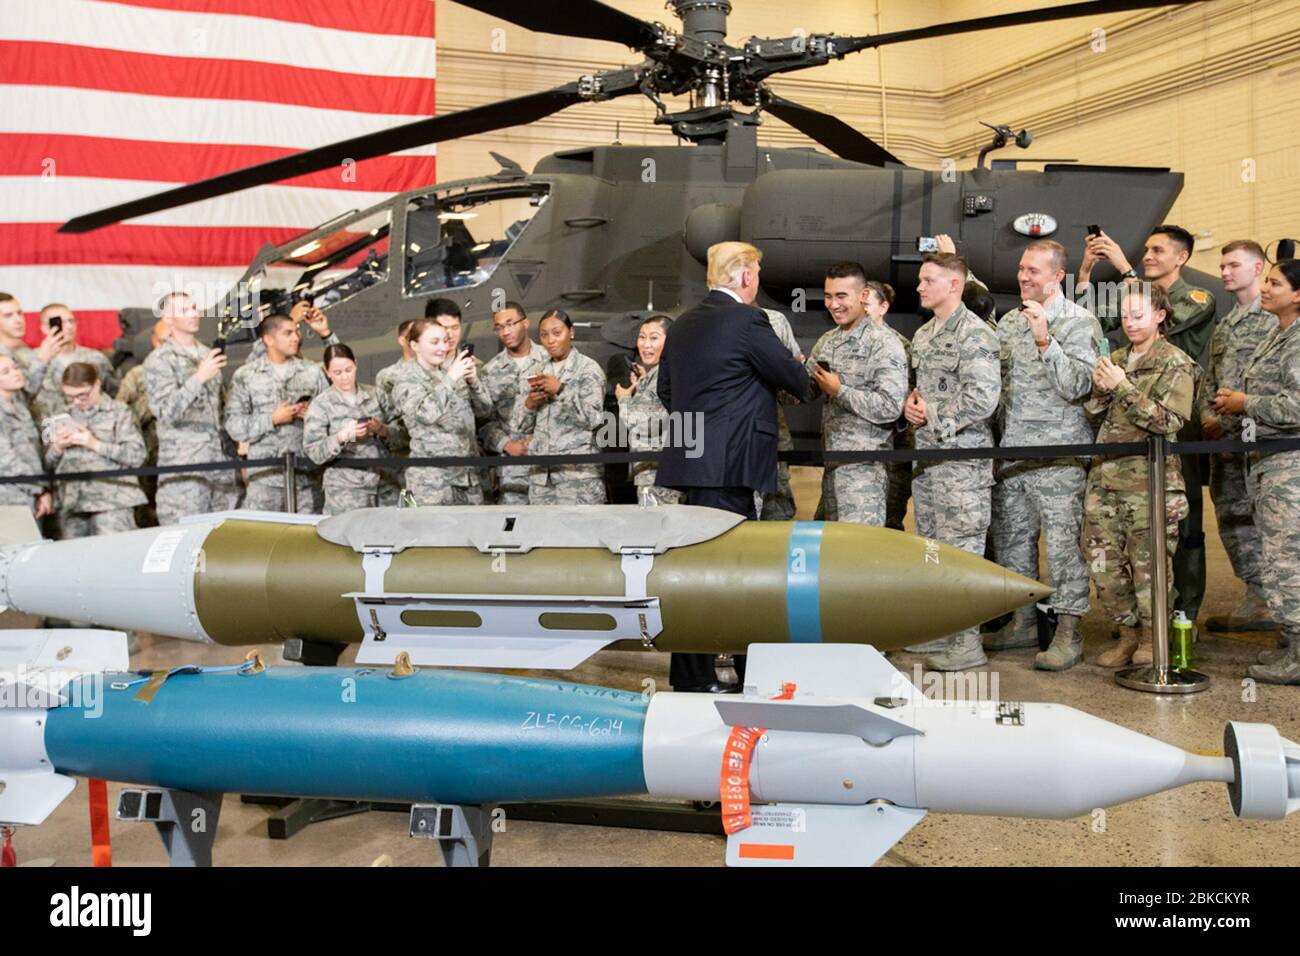 President Donald J. Trump shakes hands with service members after participating in a defense capability tour Friday, Oct. 19, 2018, at Luke Air Force Base, Ariz. President Donald J. Trump at Air Force Brigadier General Todd Canterbury Stock Photo